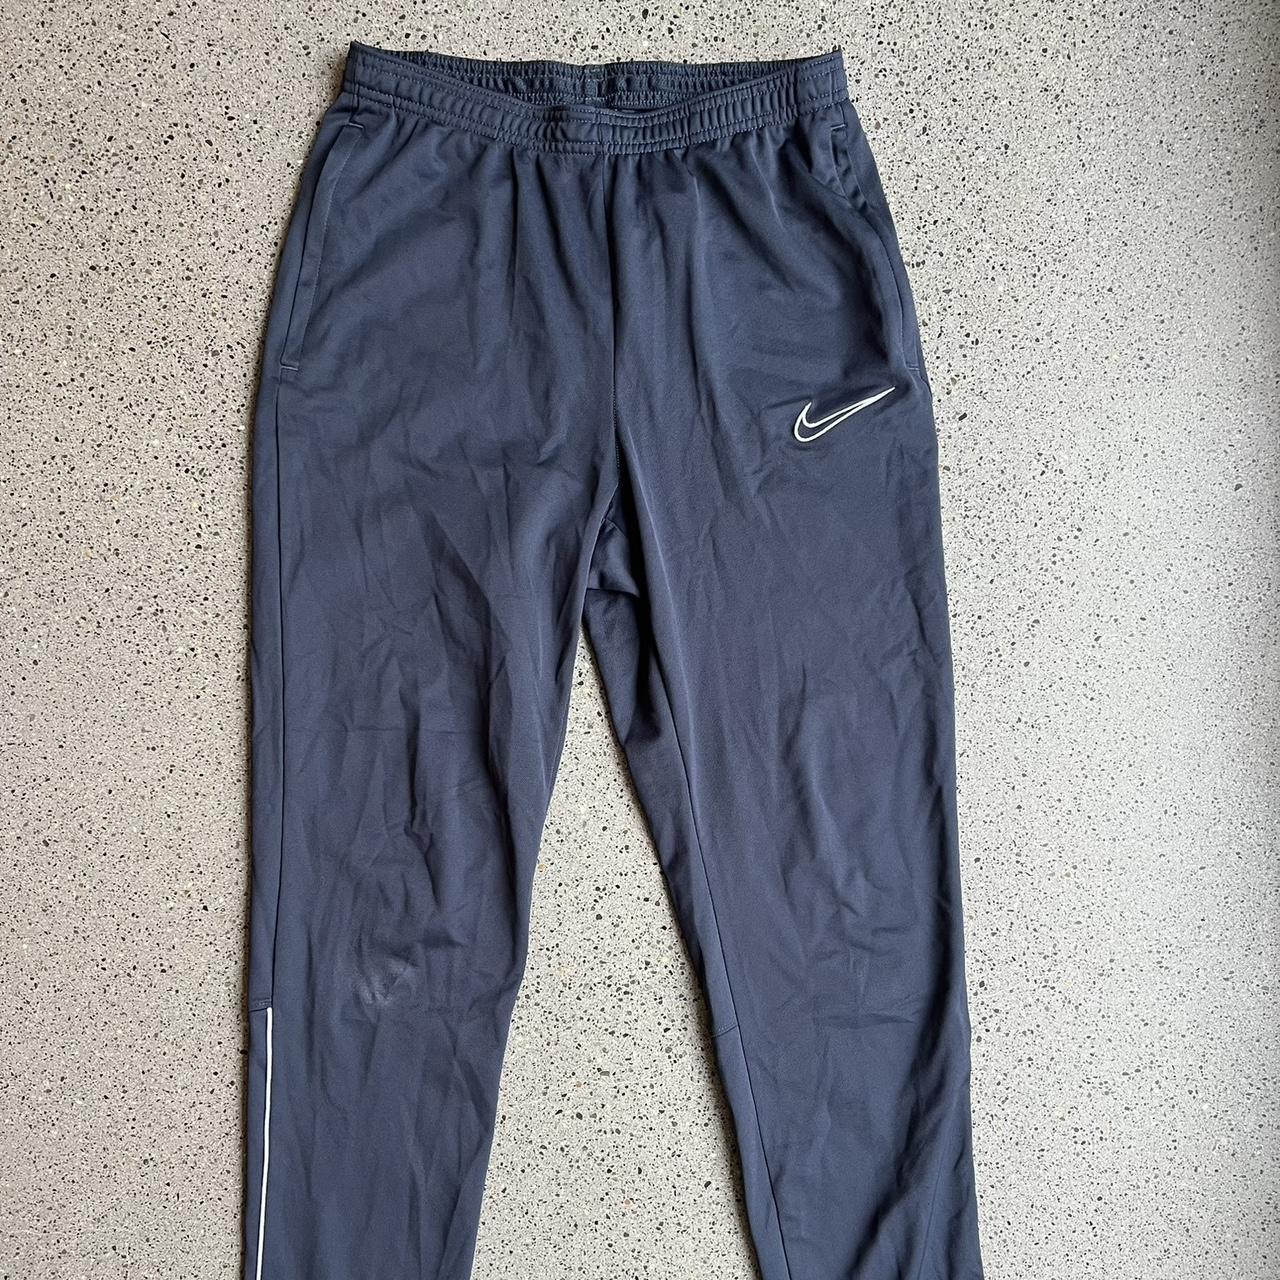 nike dri fit bottoms, fitted size small, navy